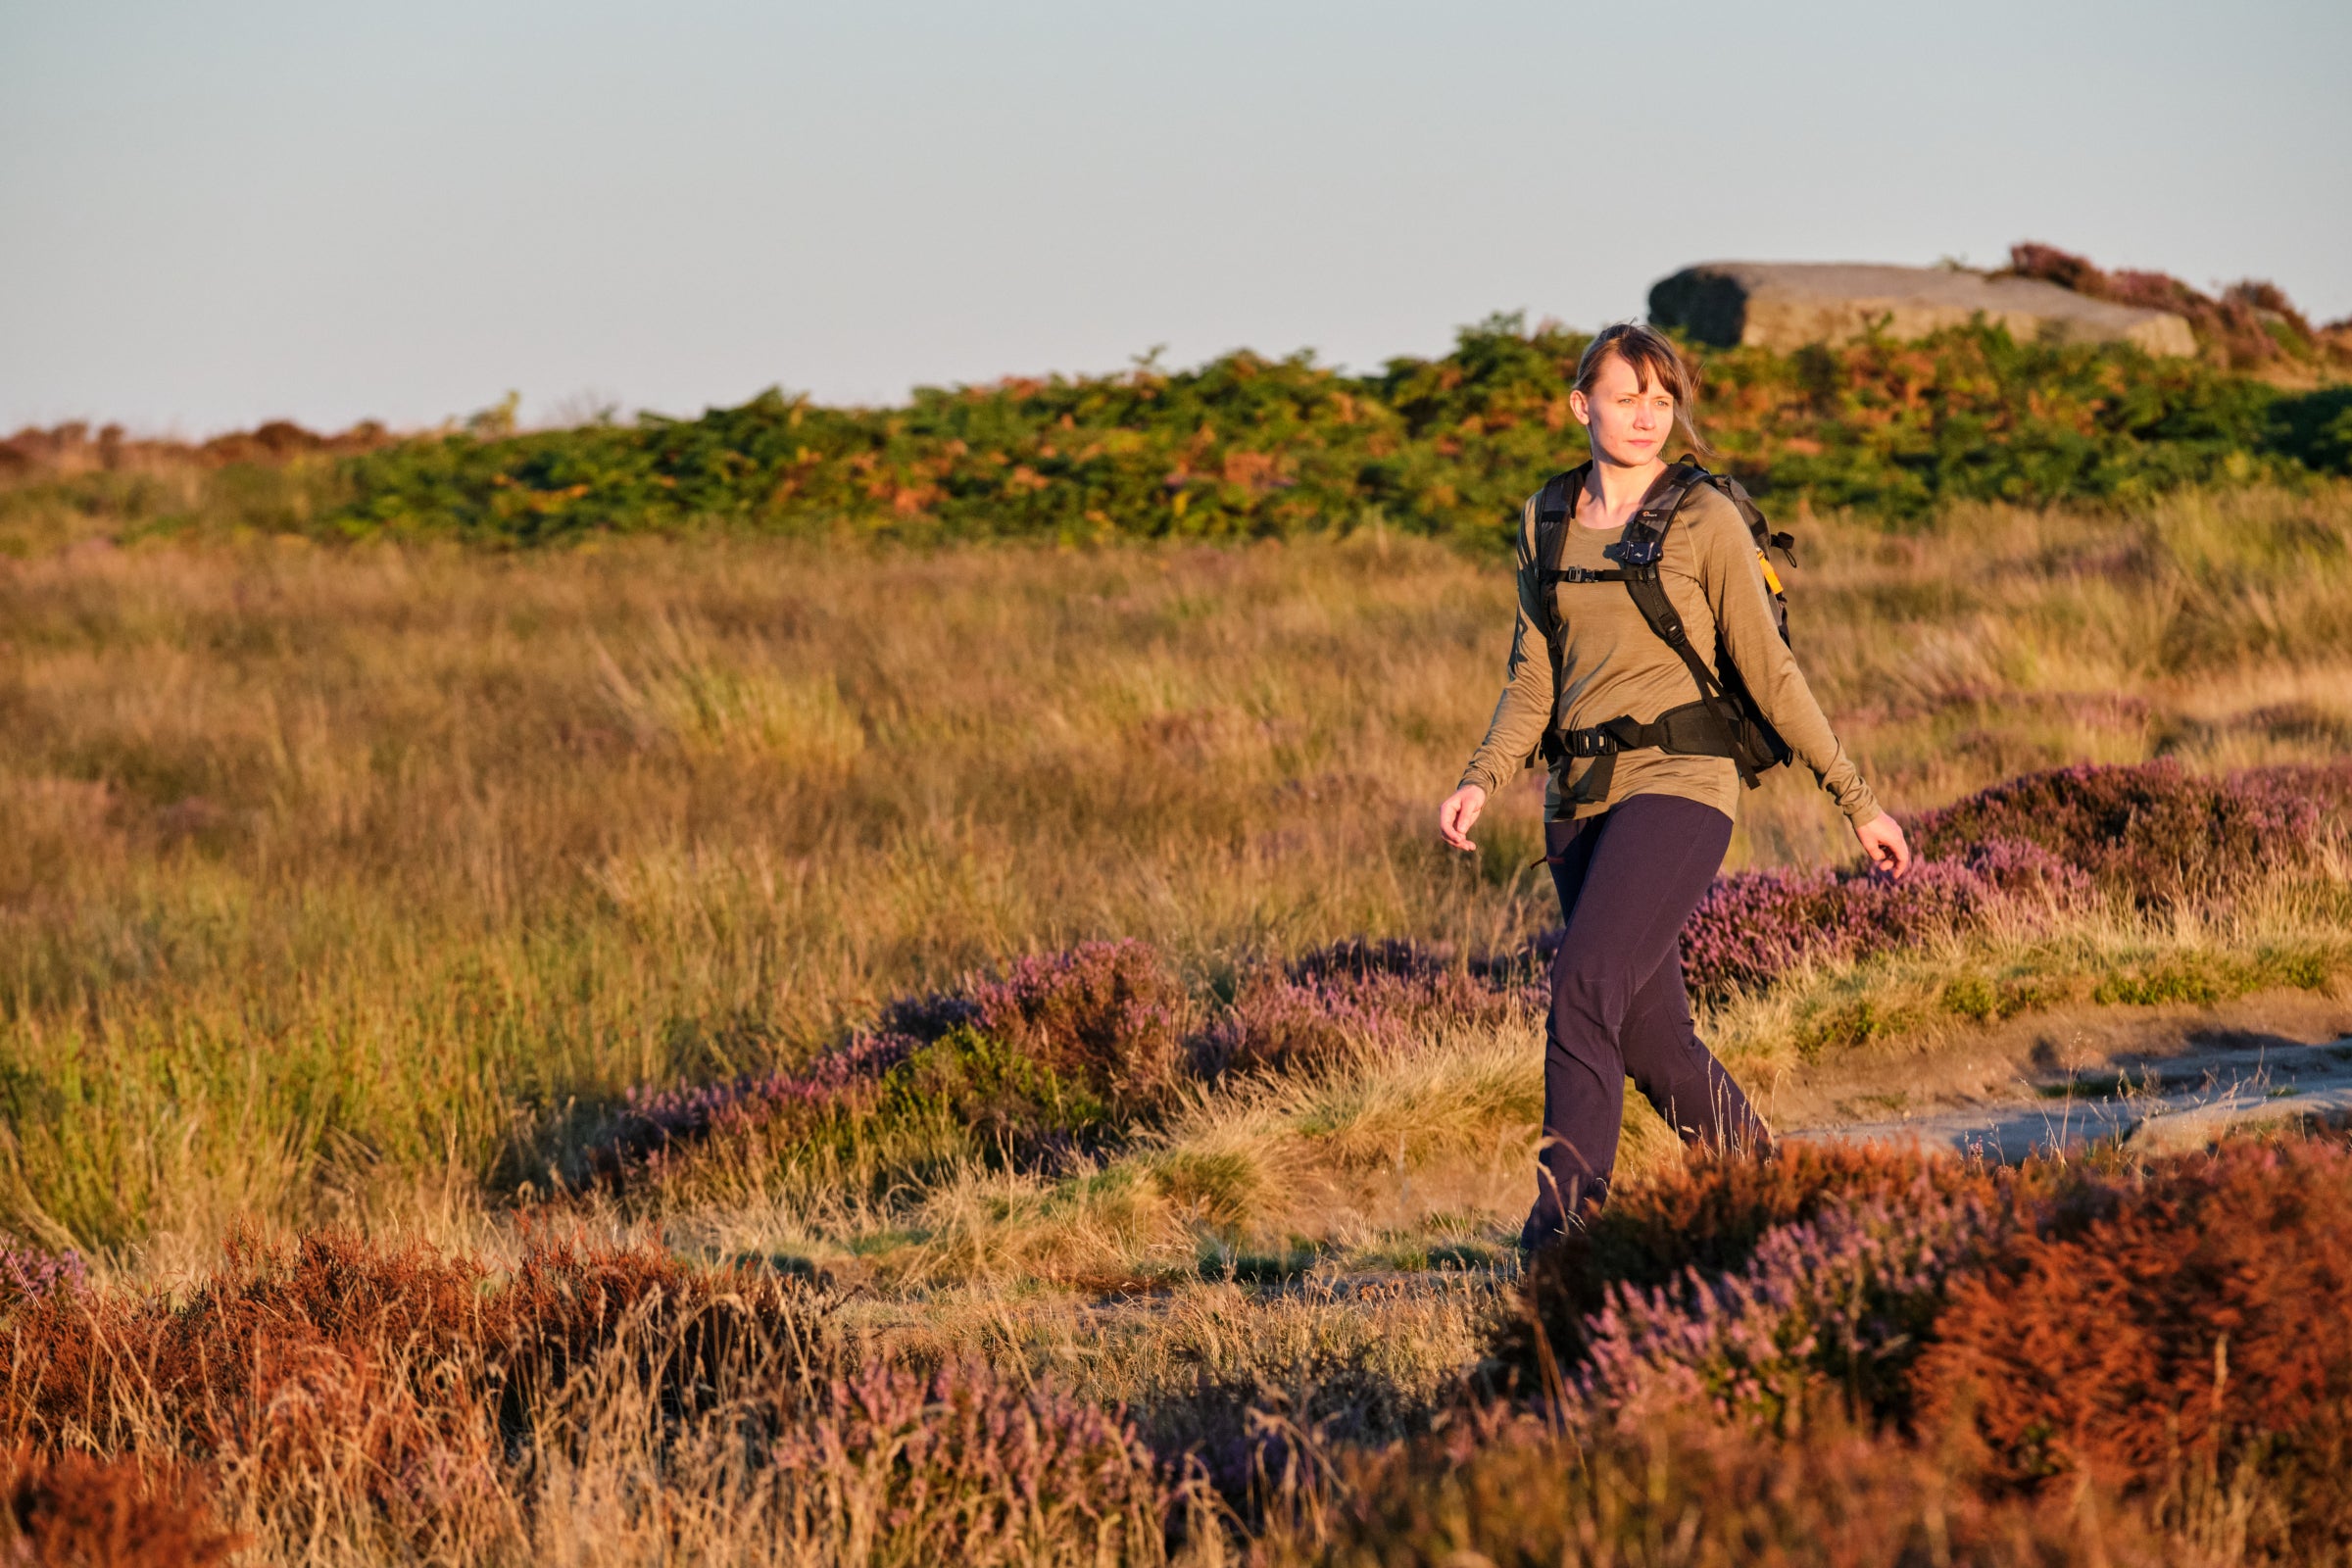 A person hiking through a grassy field wearing Fjern clothing